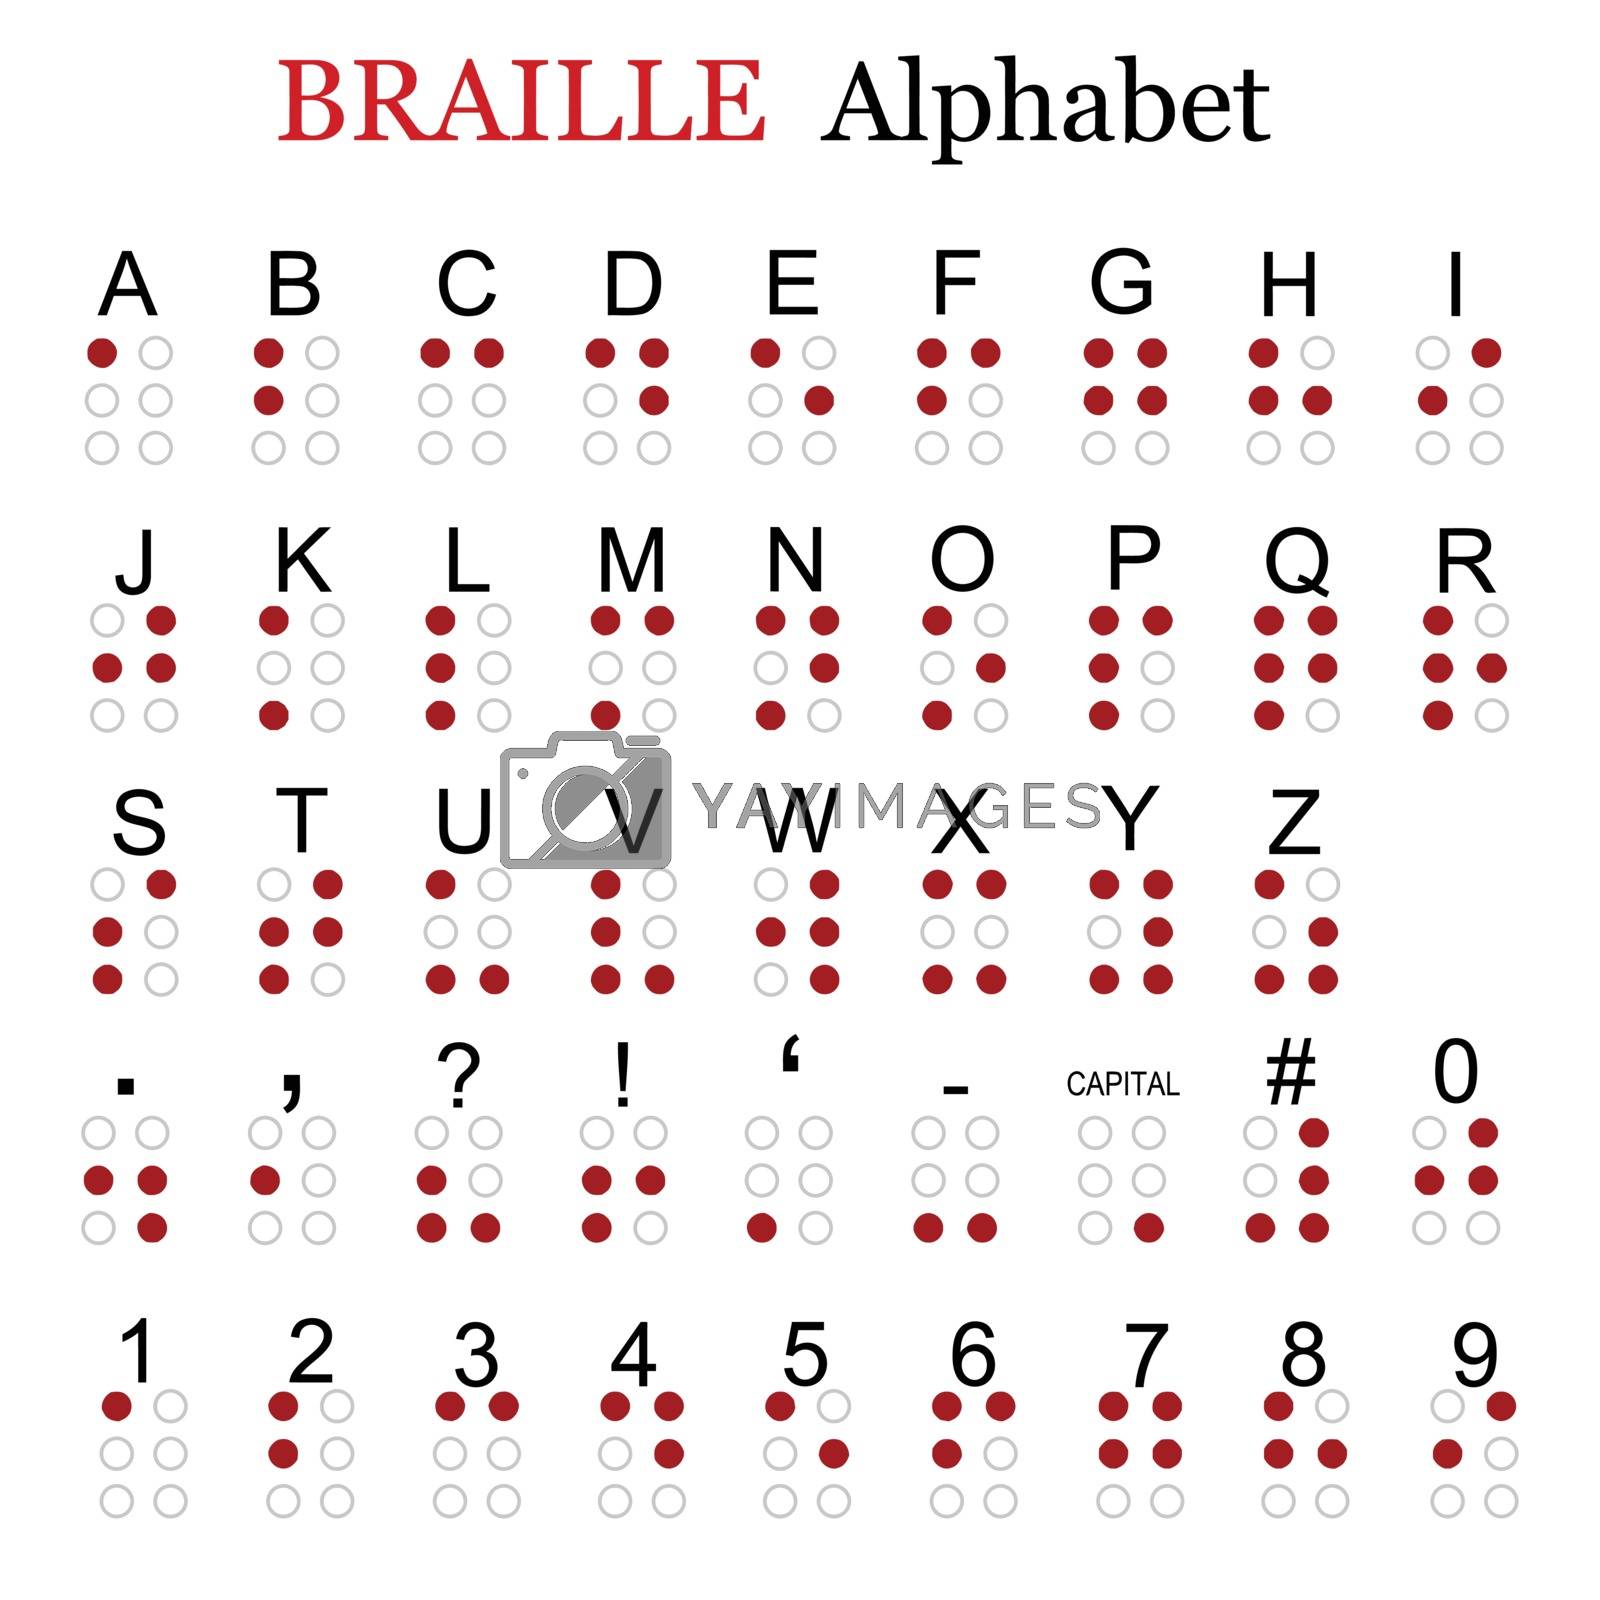 Royalty free image of Braille alphabet by roxanabalint